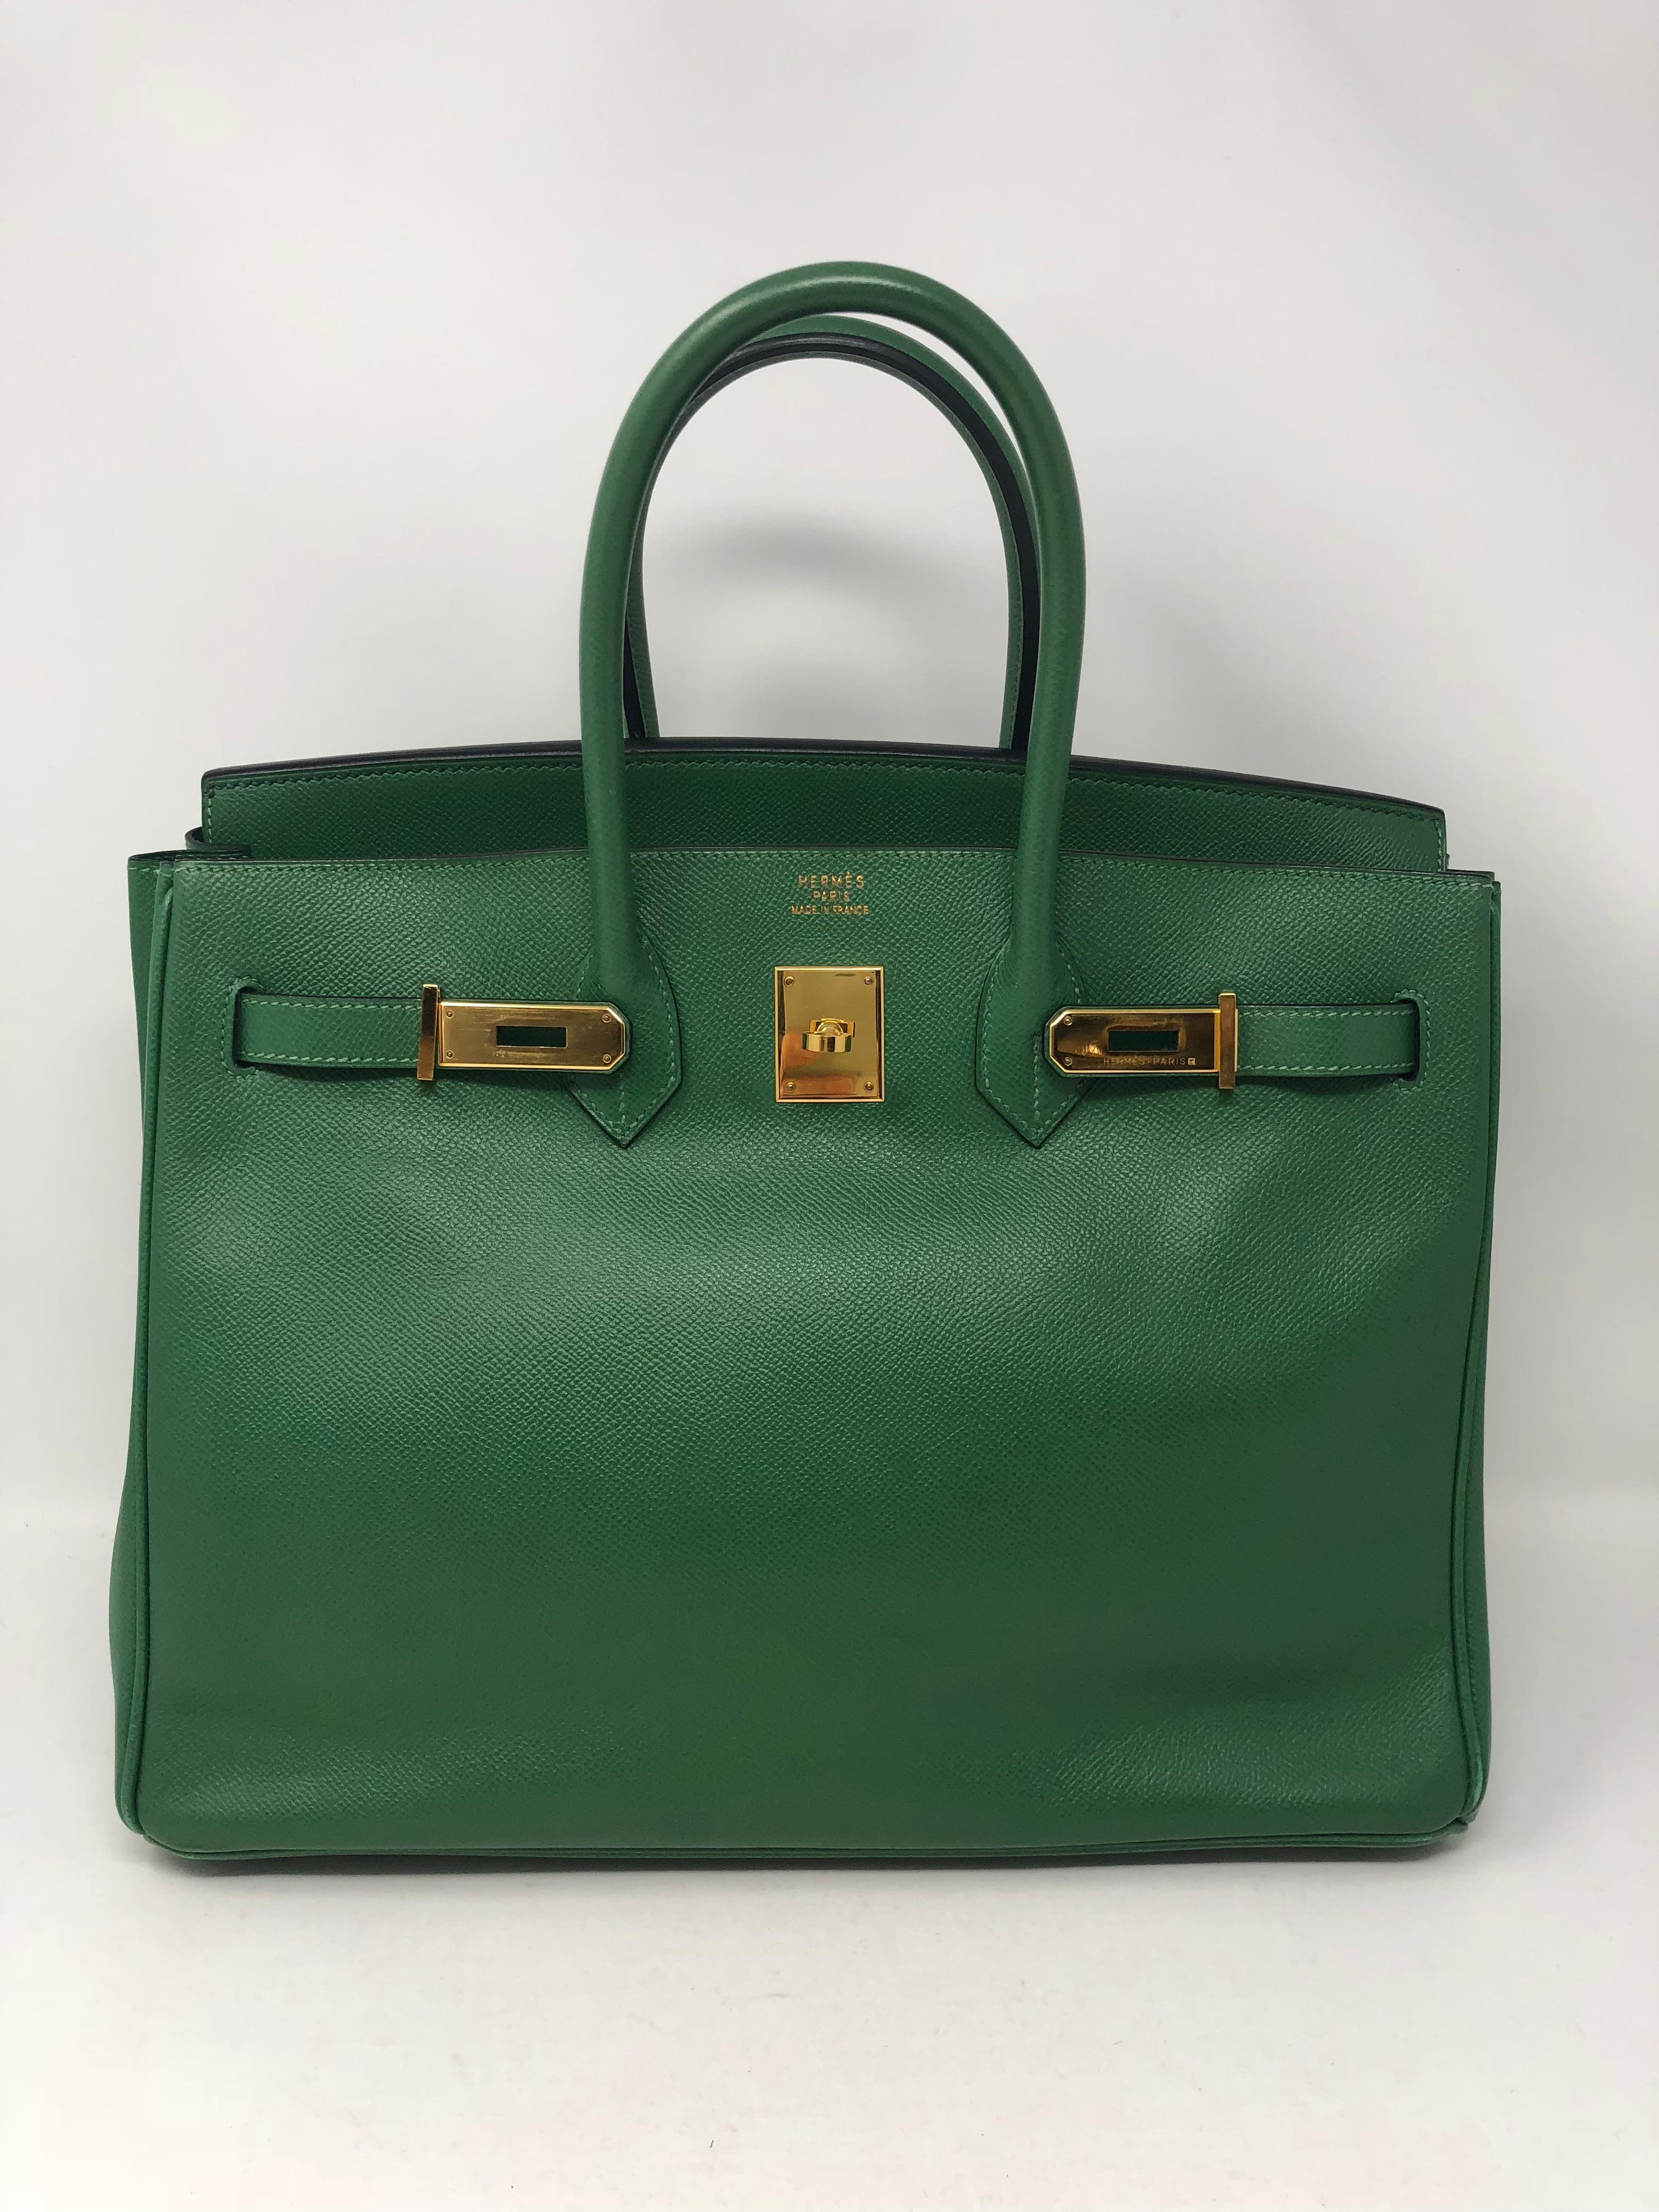 Hermes Birkin 35 in Emerald Green color. It is a beautiful deep green that is the most wanted color for the Season. Gold hardware and courchevel leather. Vintage Birkin in great condition. Light wear only on corners. Barely noticeable and leather in